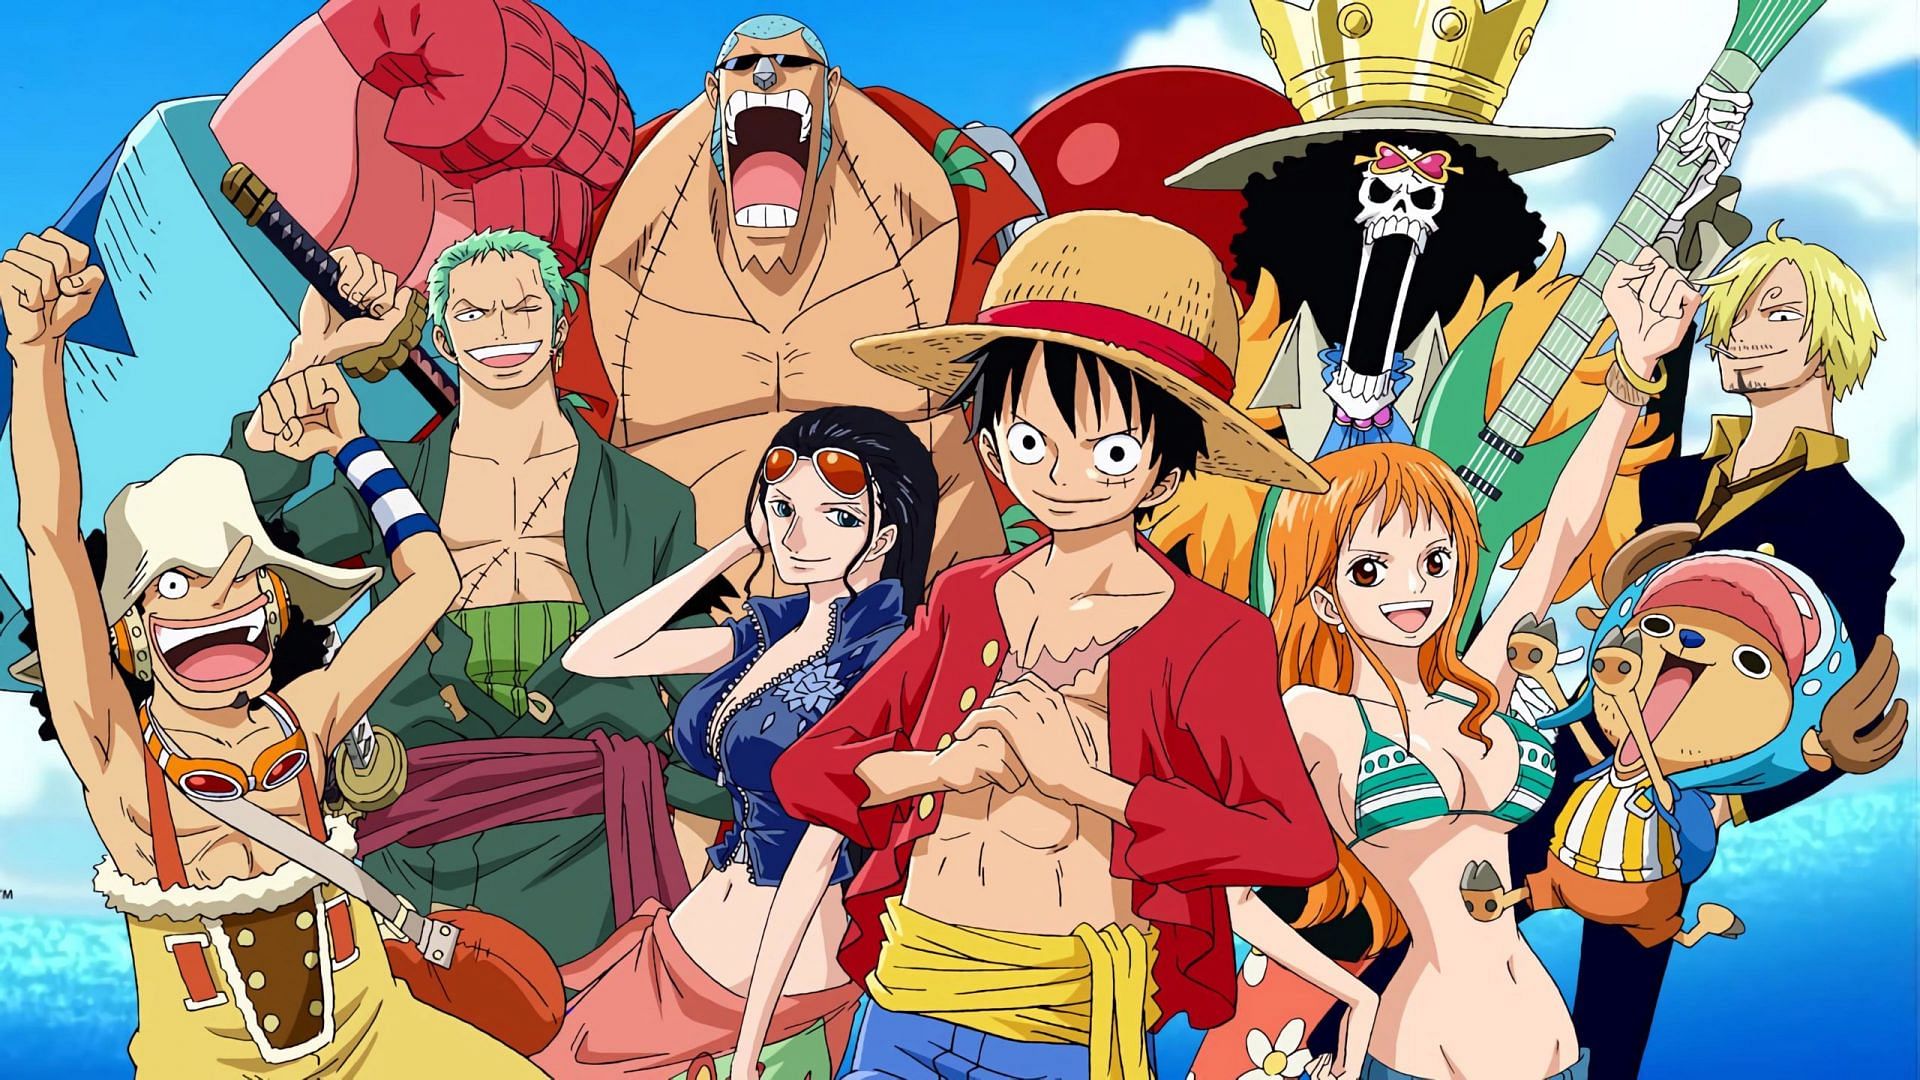 A new trailer has been released to celebrate the return of the One Piece manga (Image via Toei Animation)